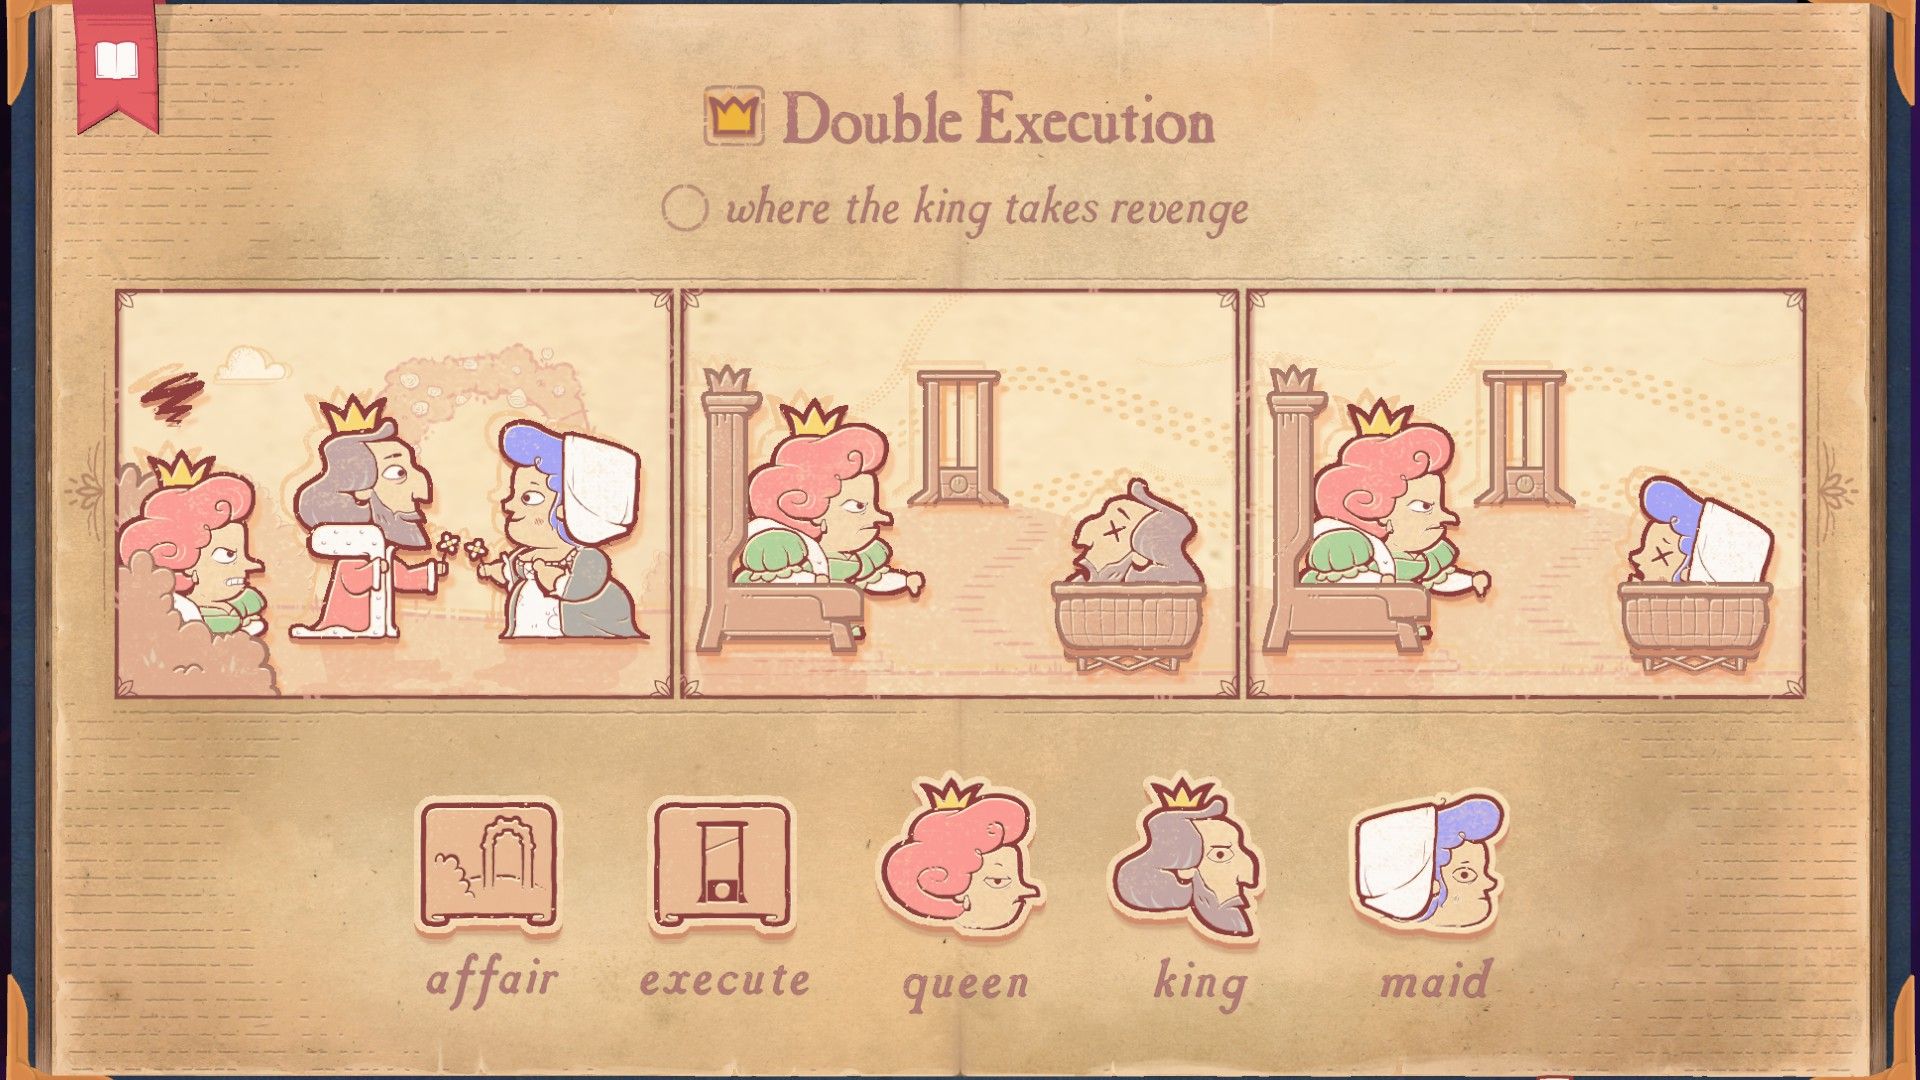 The solution for the Spite section of Storyteller, showing a double execution.